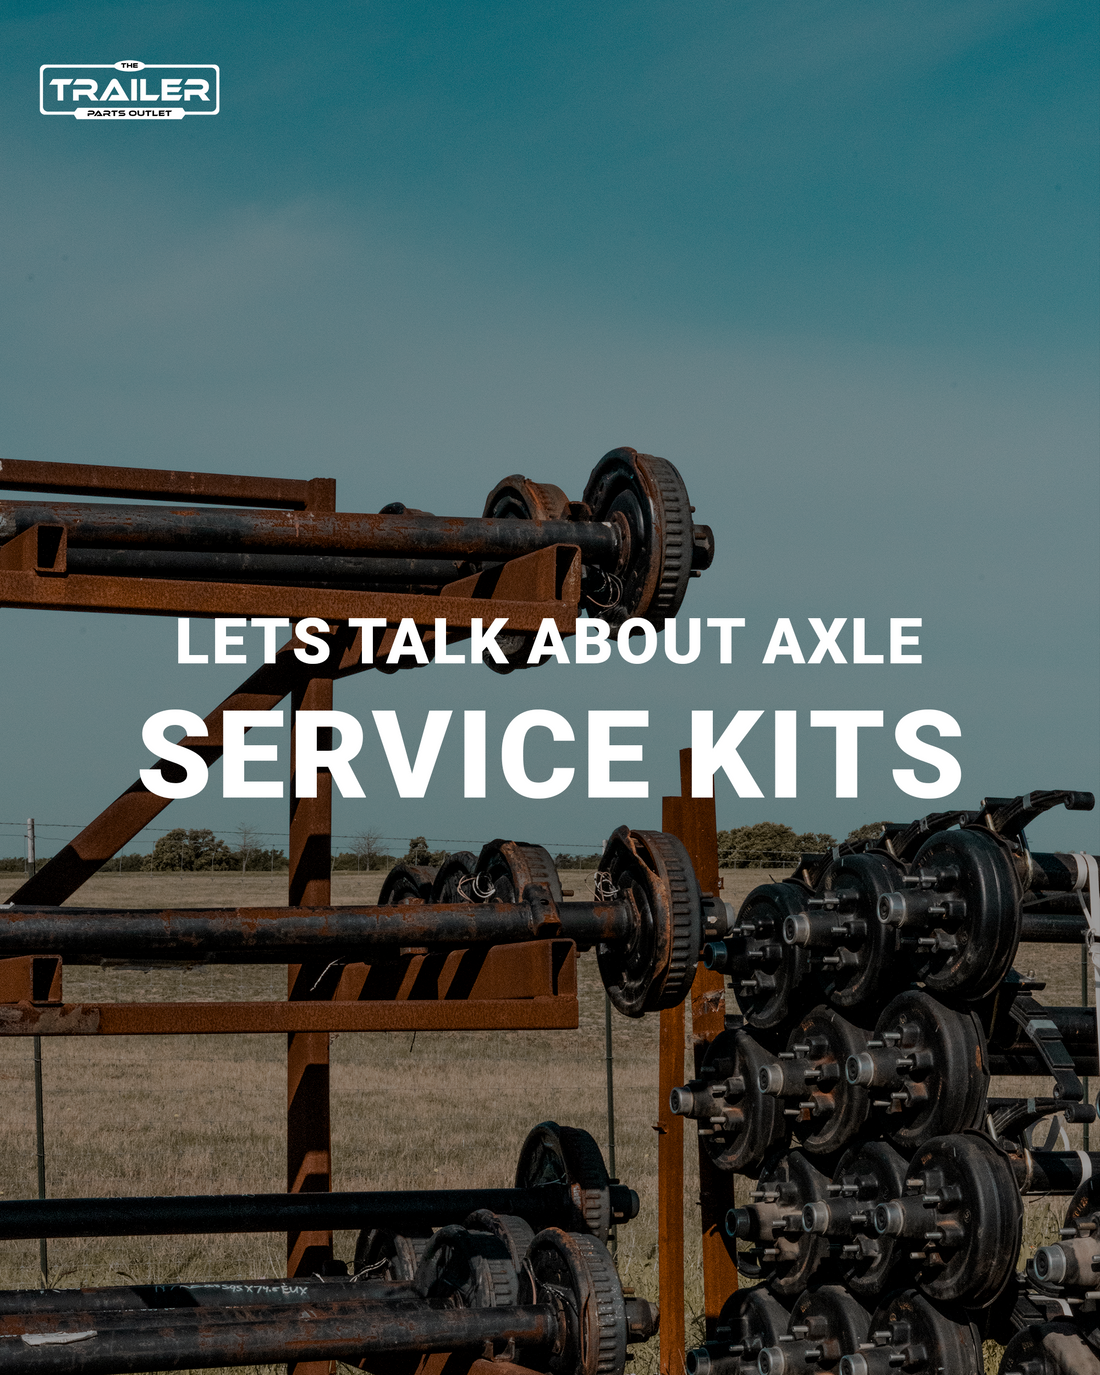 Let's Talk About Axle Service Kits